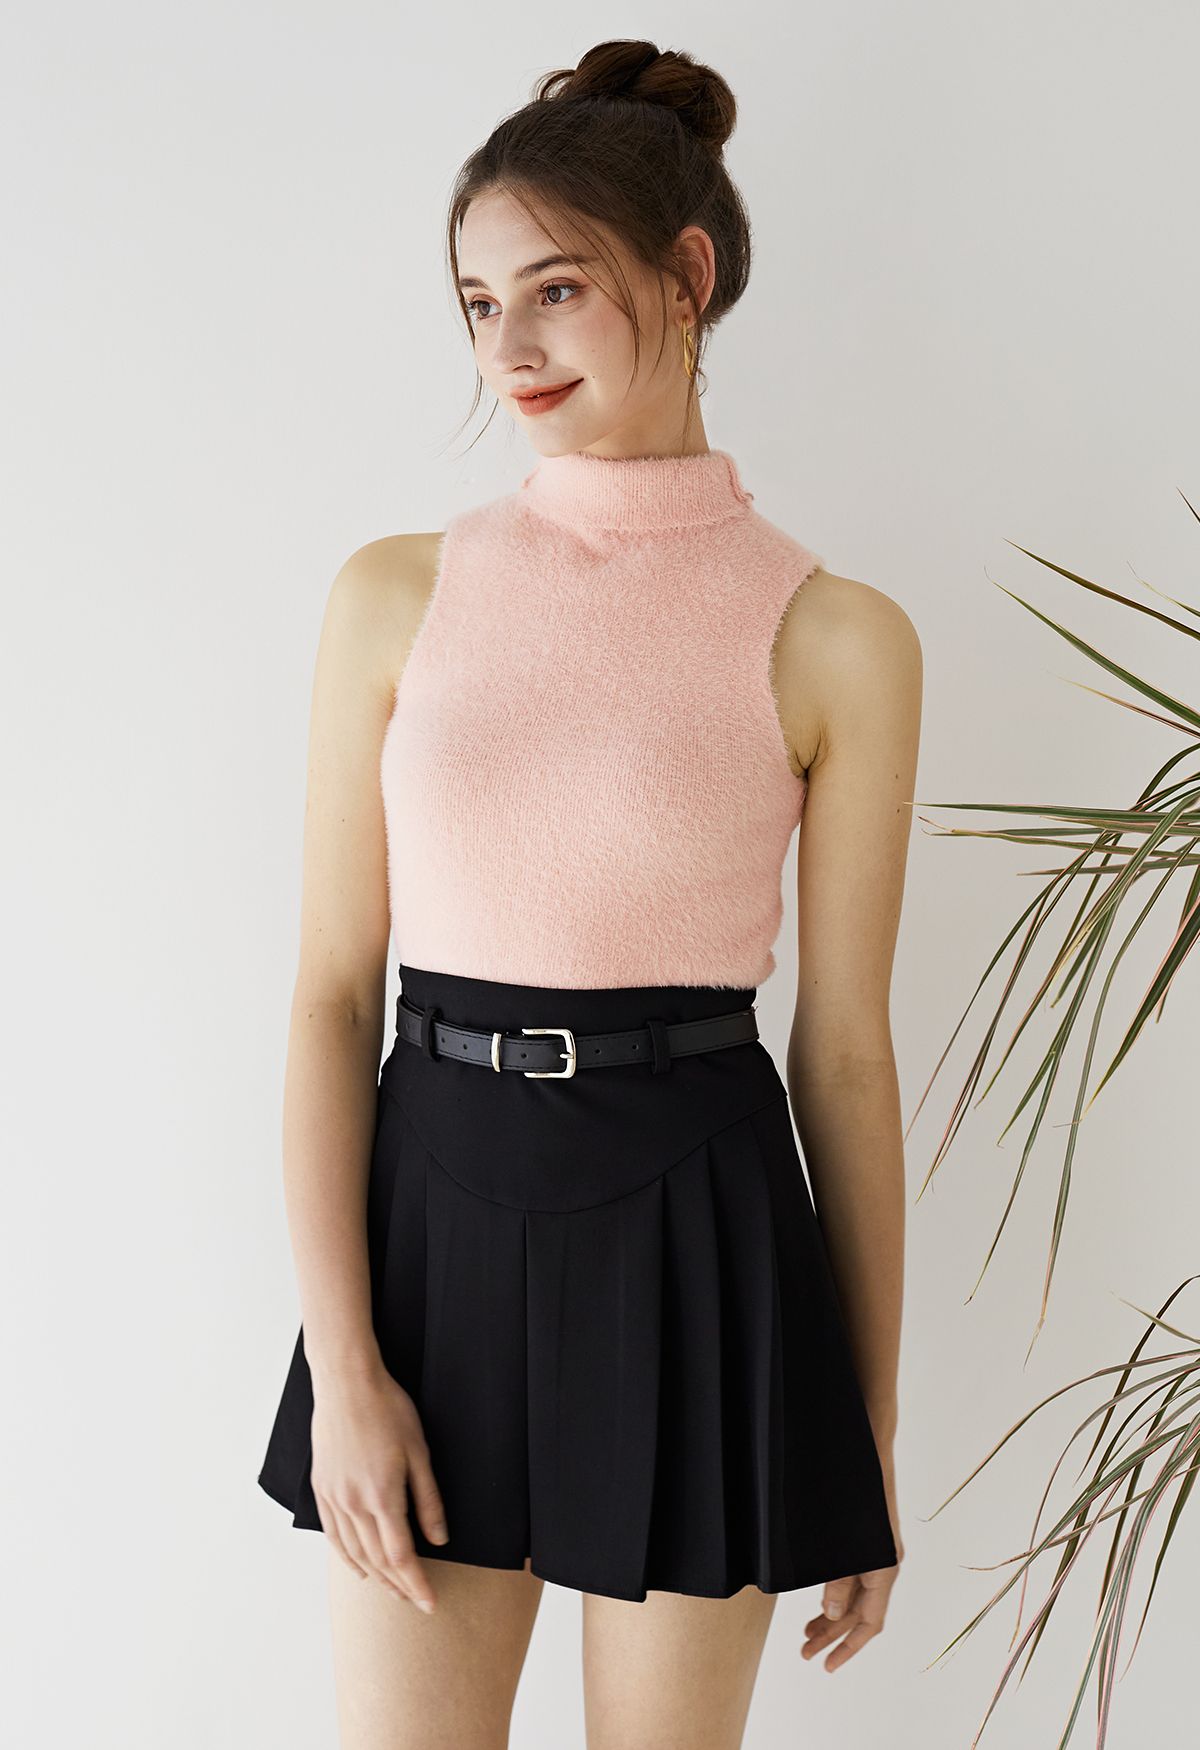 Wednesday Belted Pleated Skirt - Black